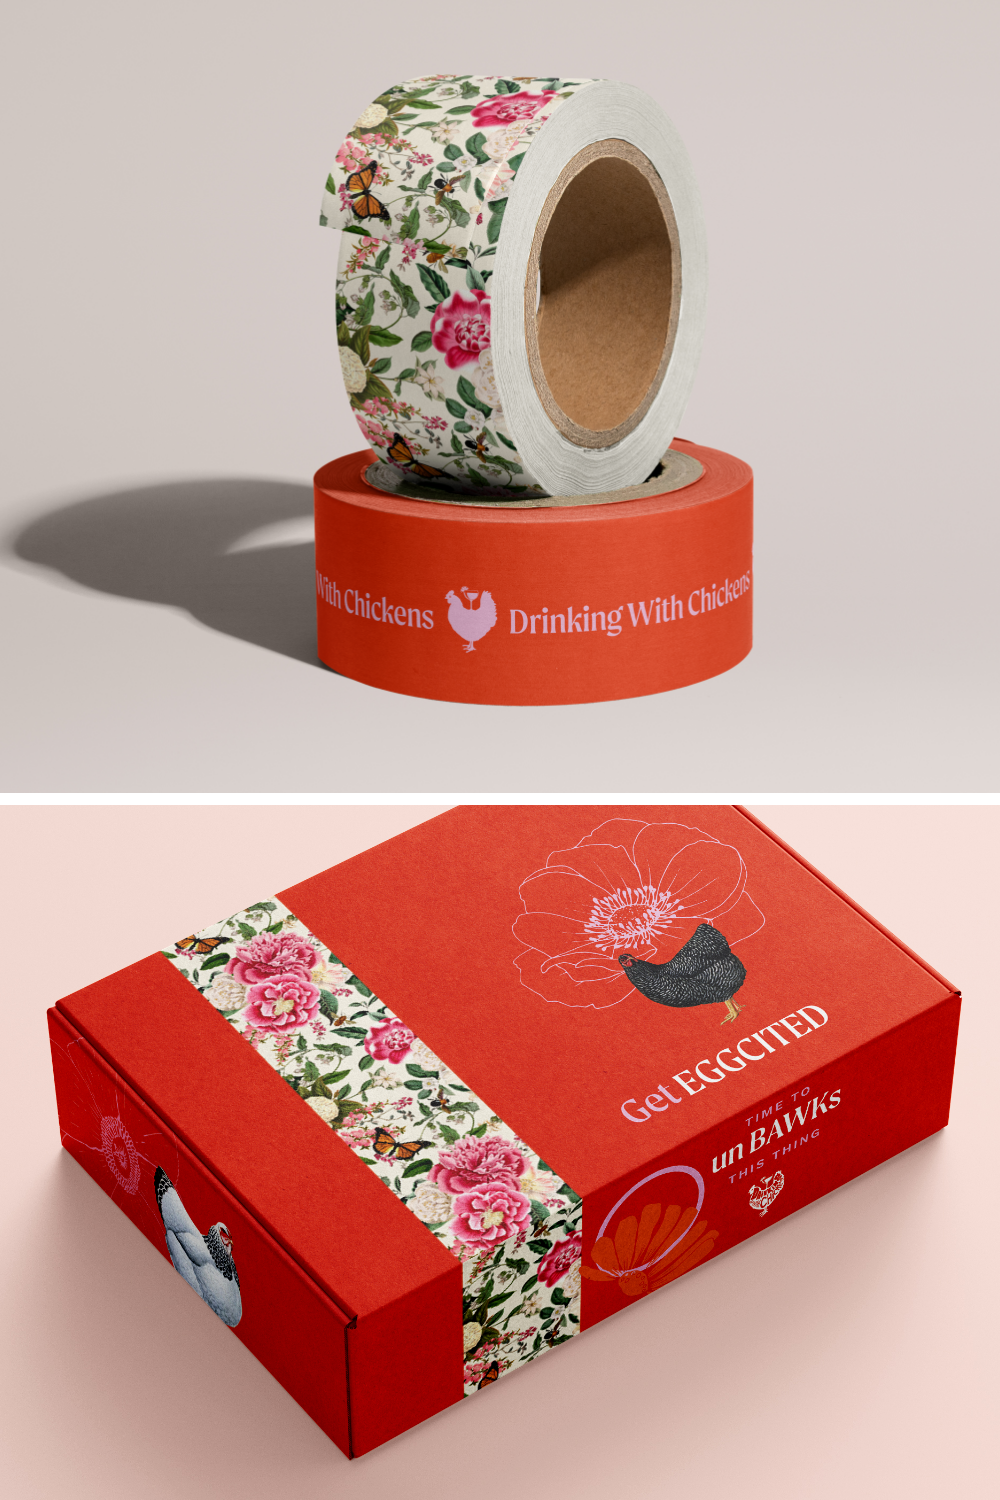 What is Washi Tape? Get to Know noissue's Newest Tape